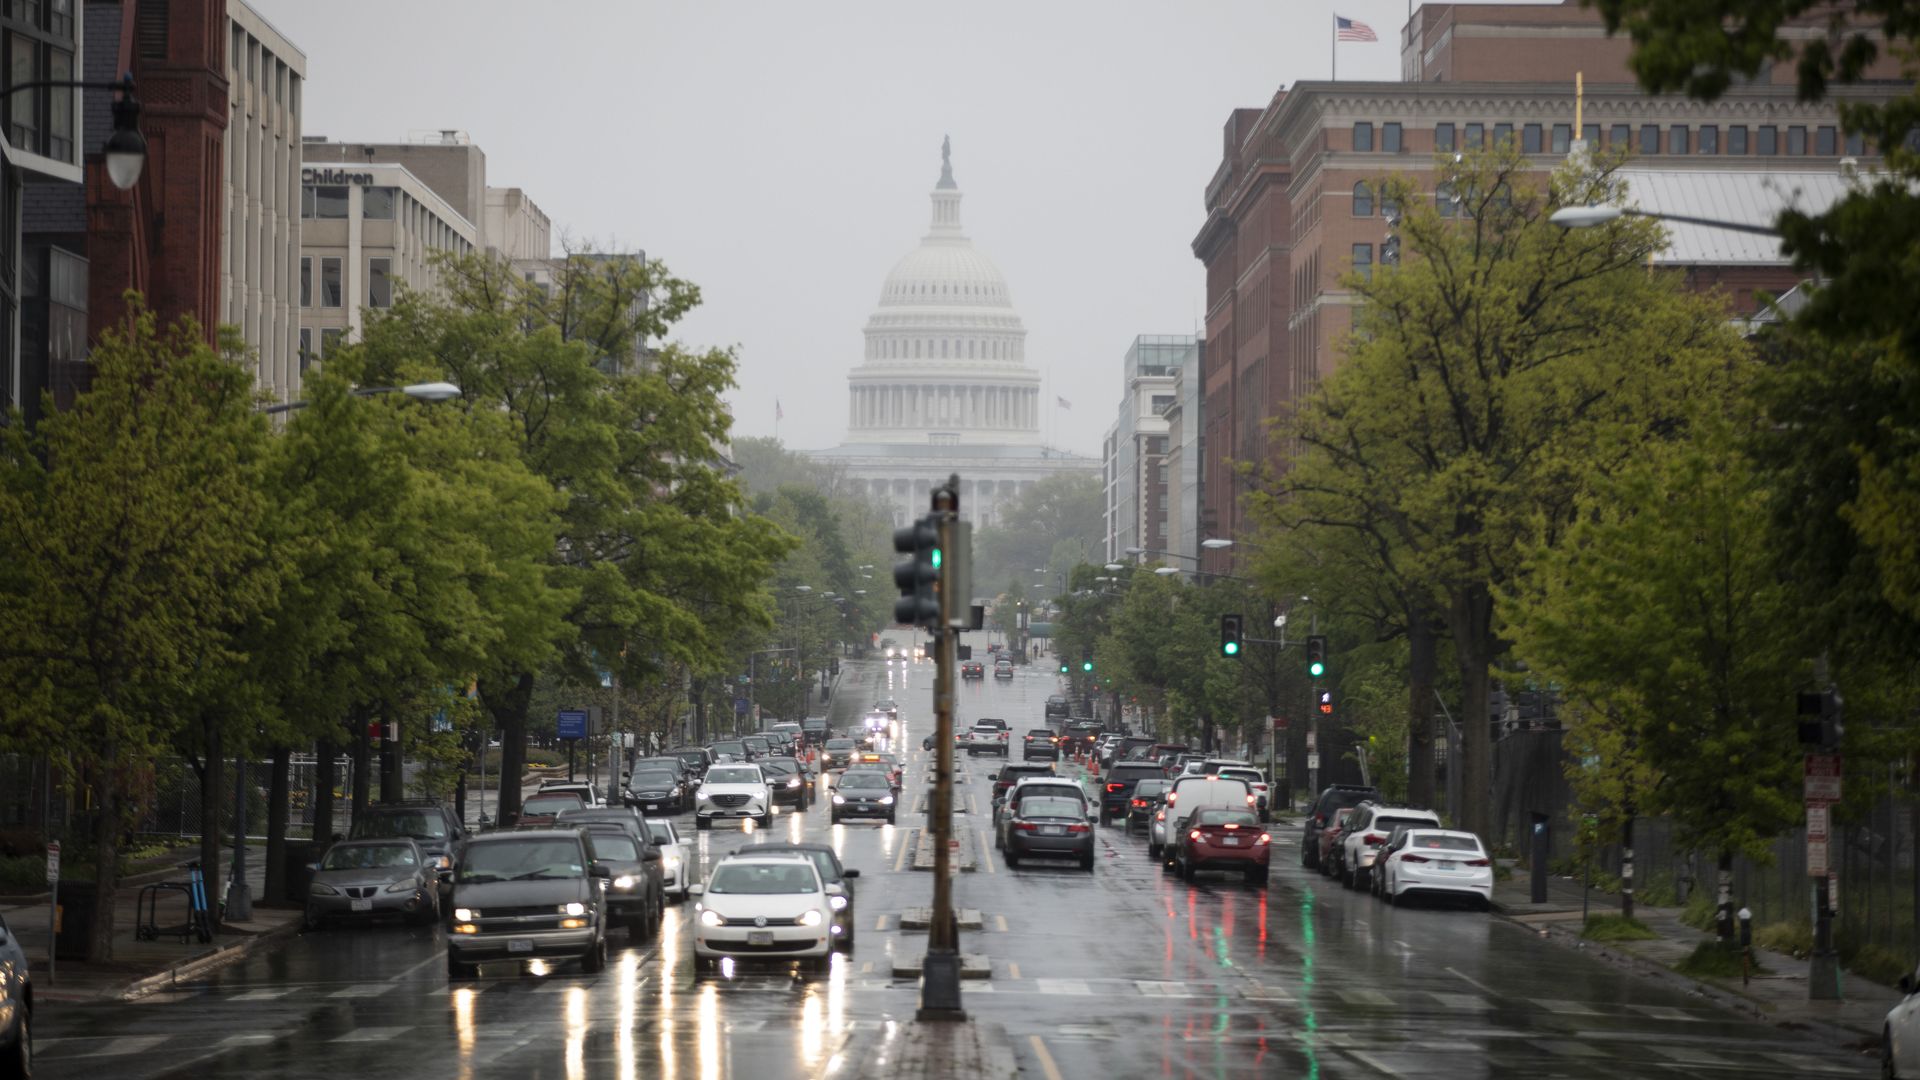 Image of cars on street leading to U.S. Capitol building